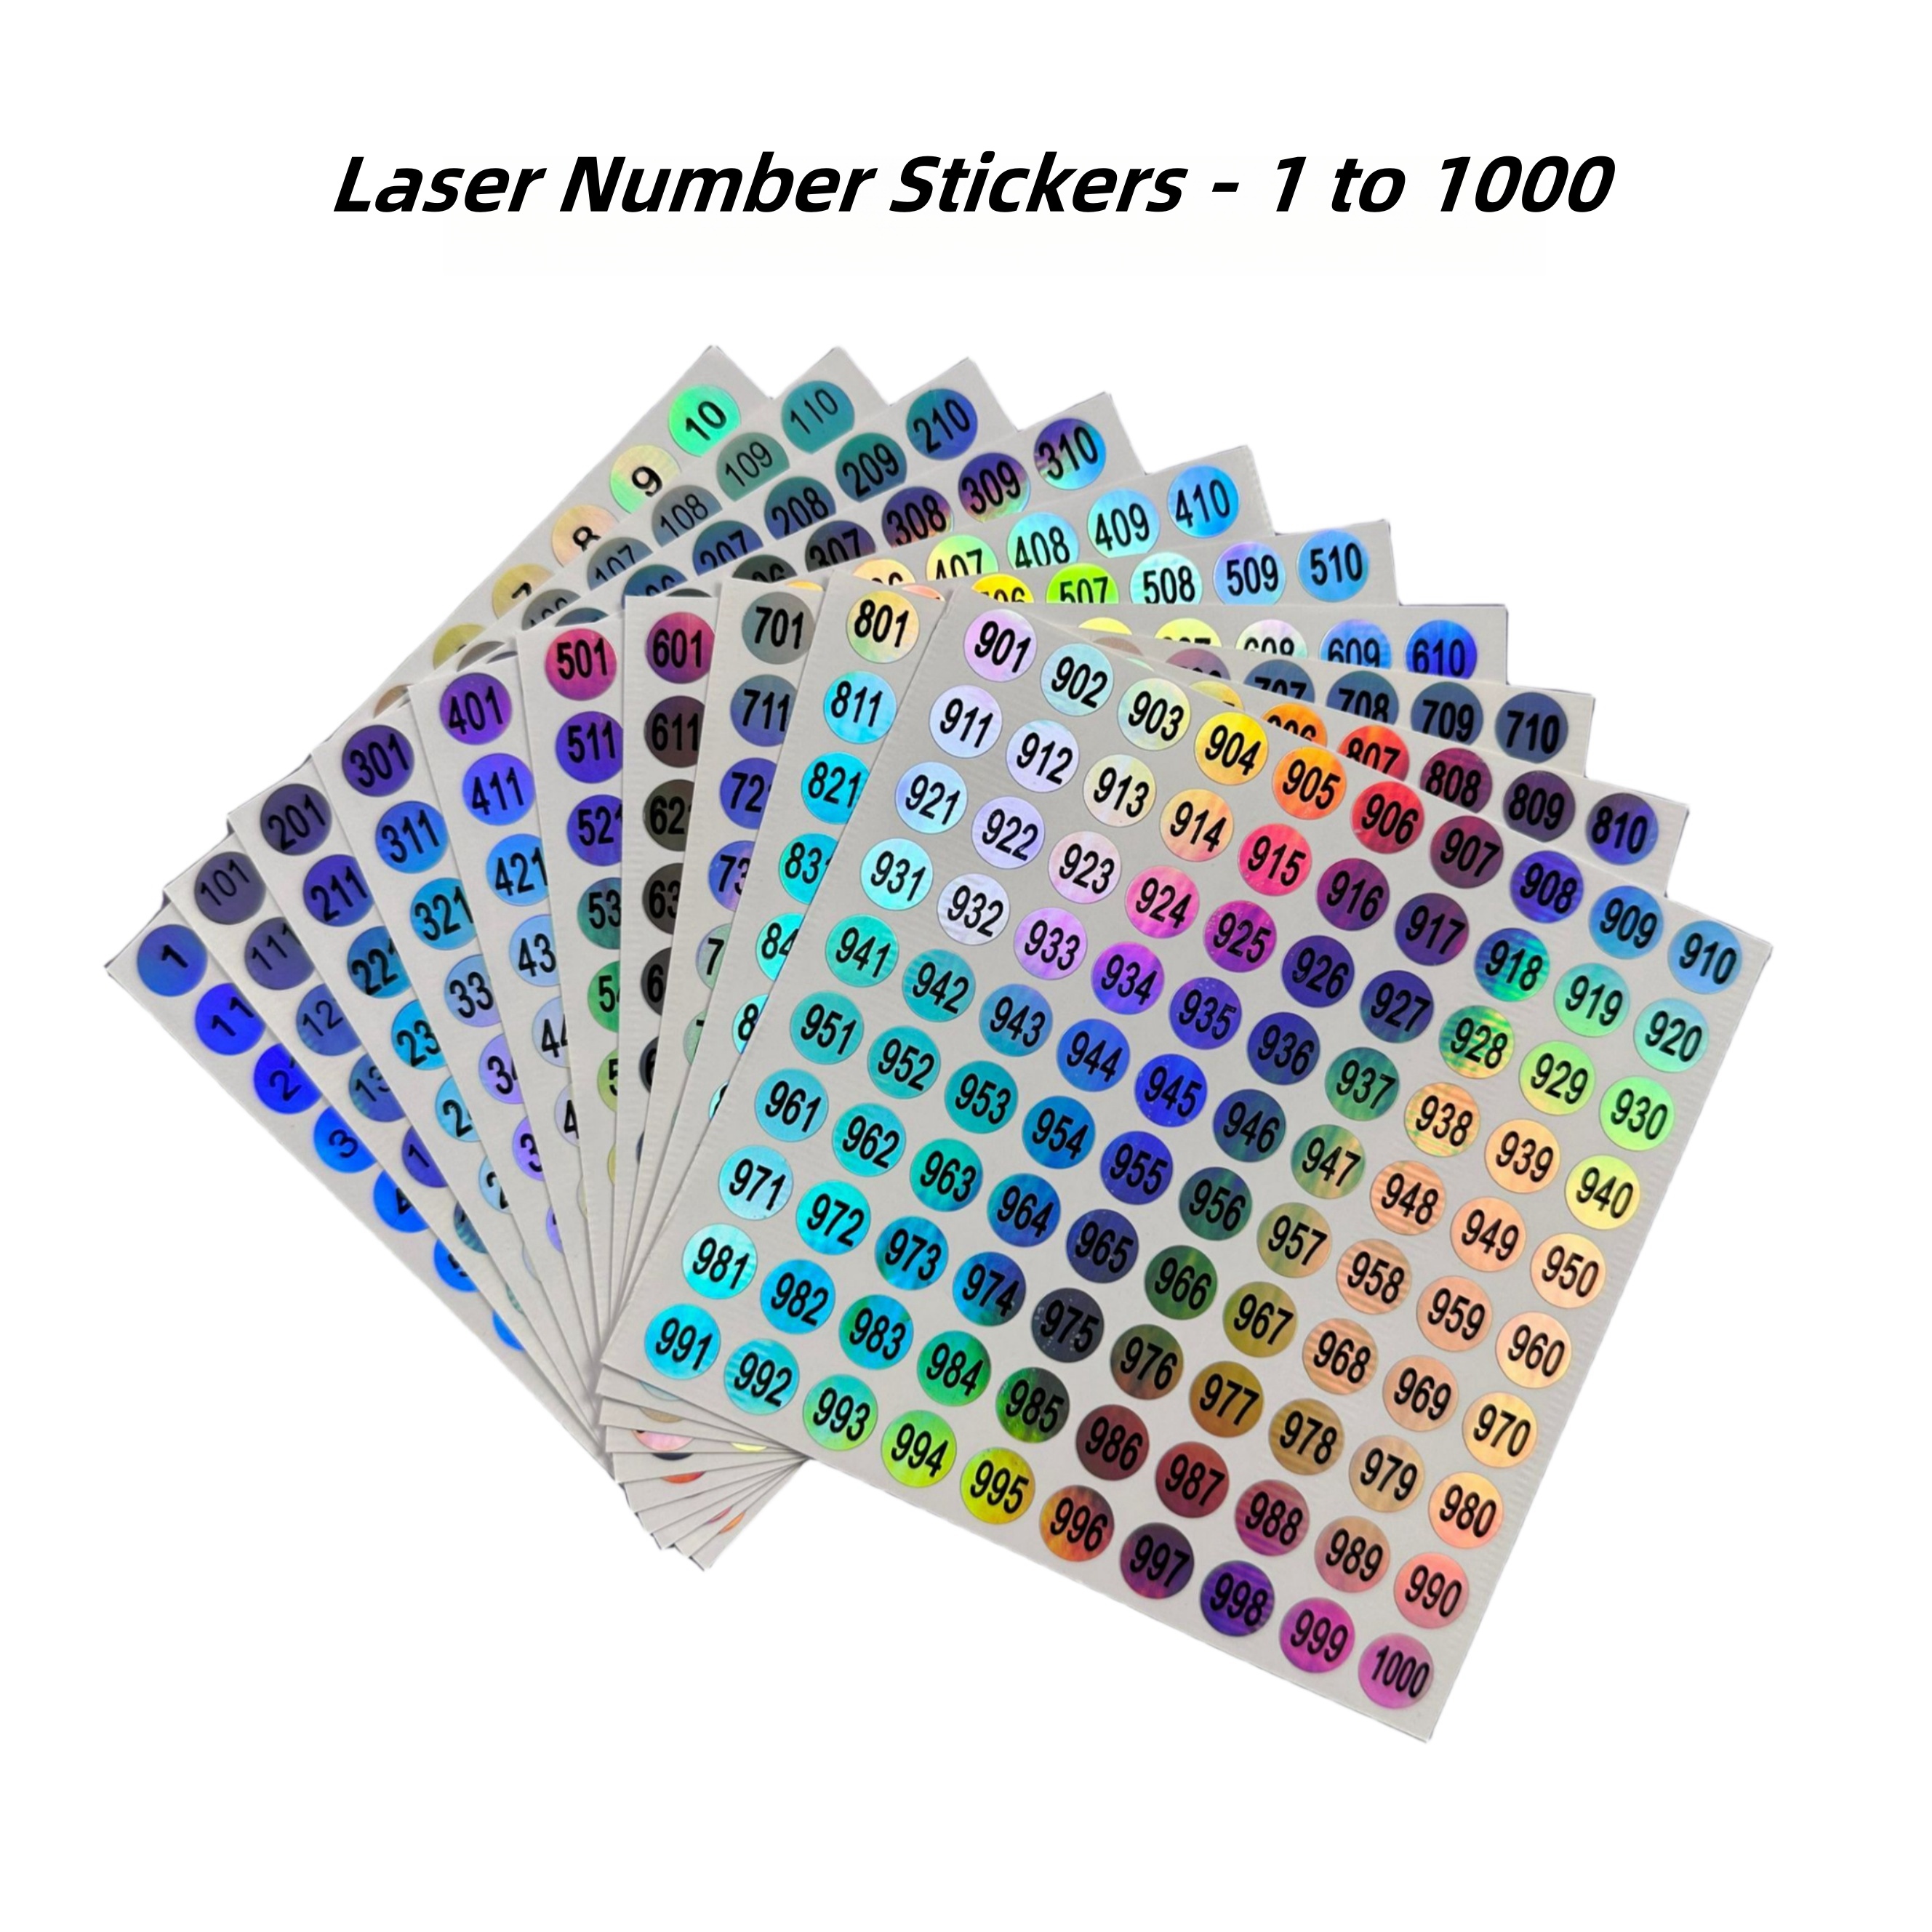 

10 Set 1 To 1000 Numbers Stickers, Reflective Laser Small Round Consecutive Numbers Stickers Self Adhesive Inventory Storage Organizing Label Stickers 0.4 Inch For Home School Office Decoration